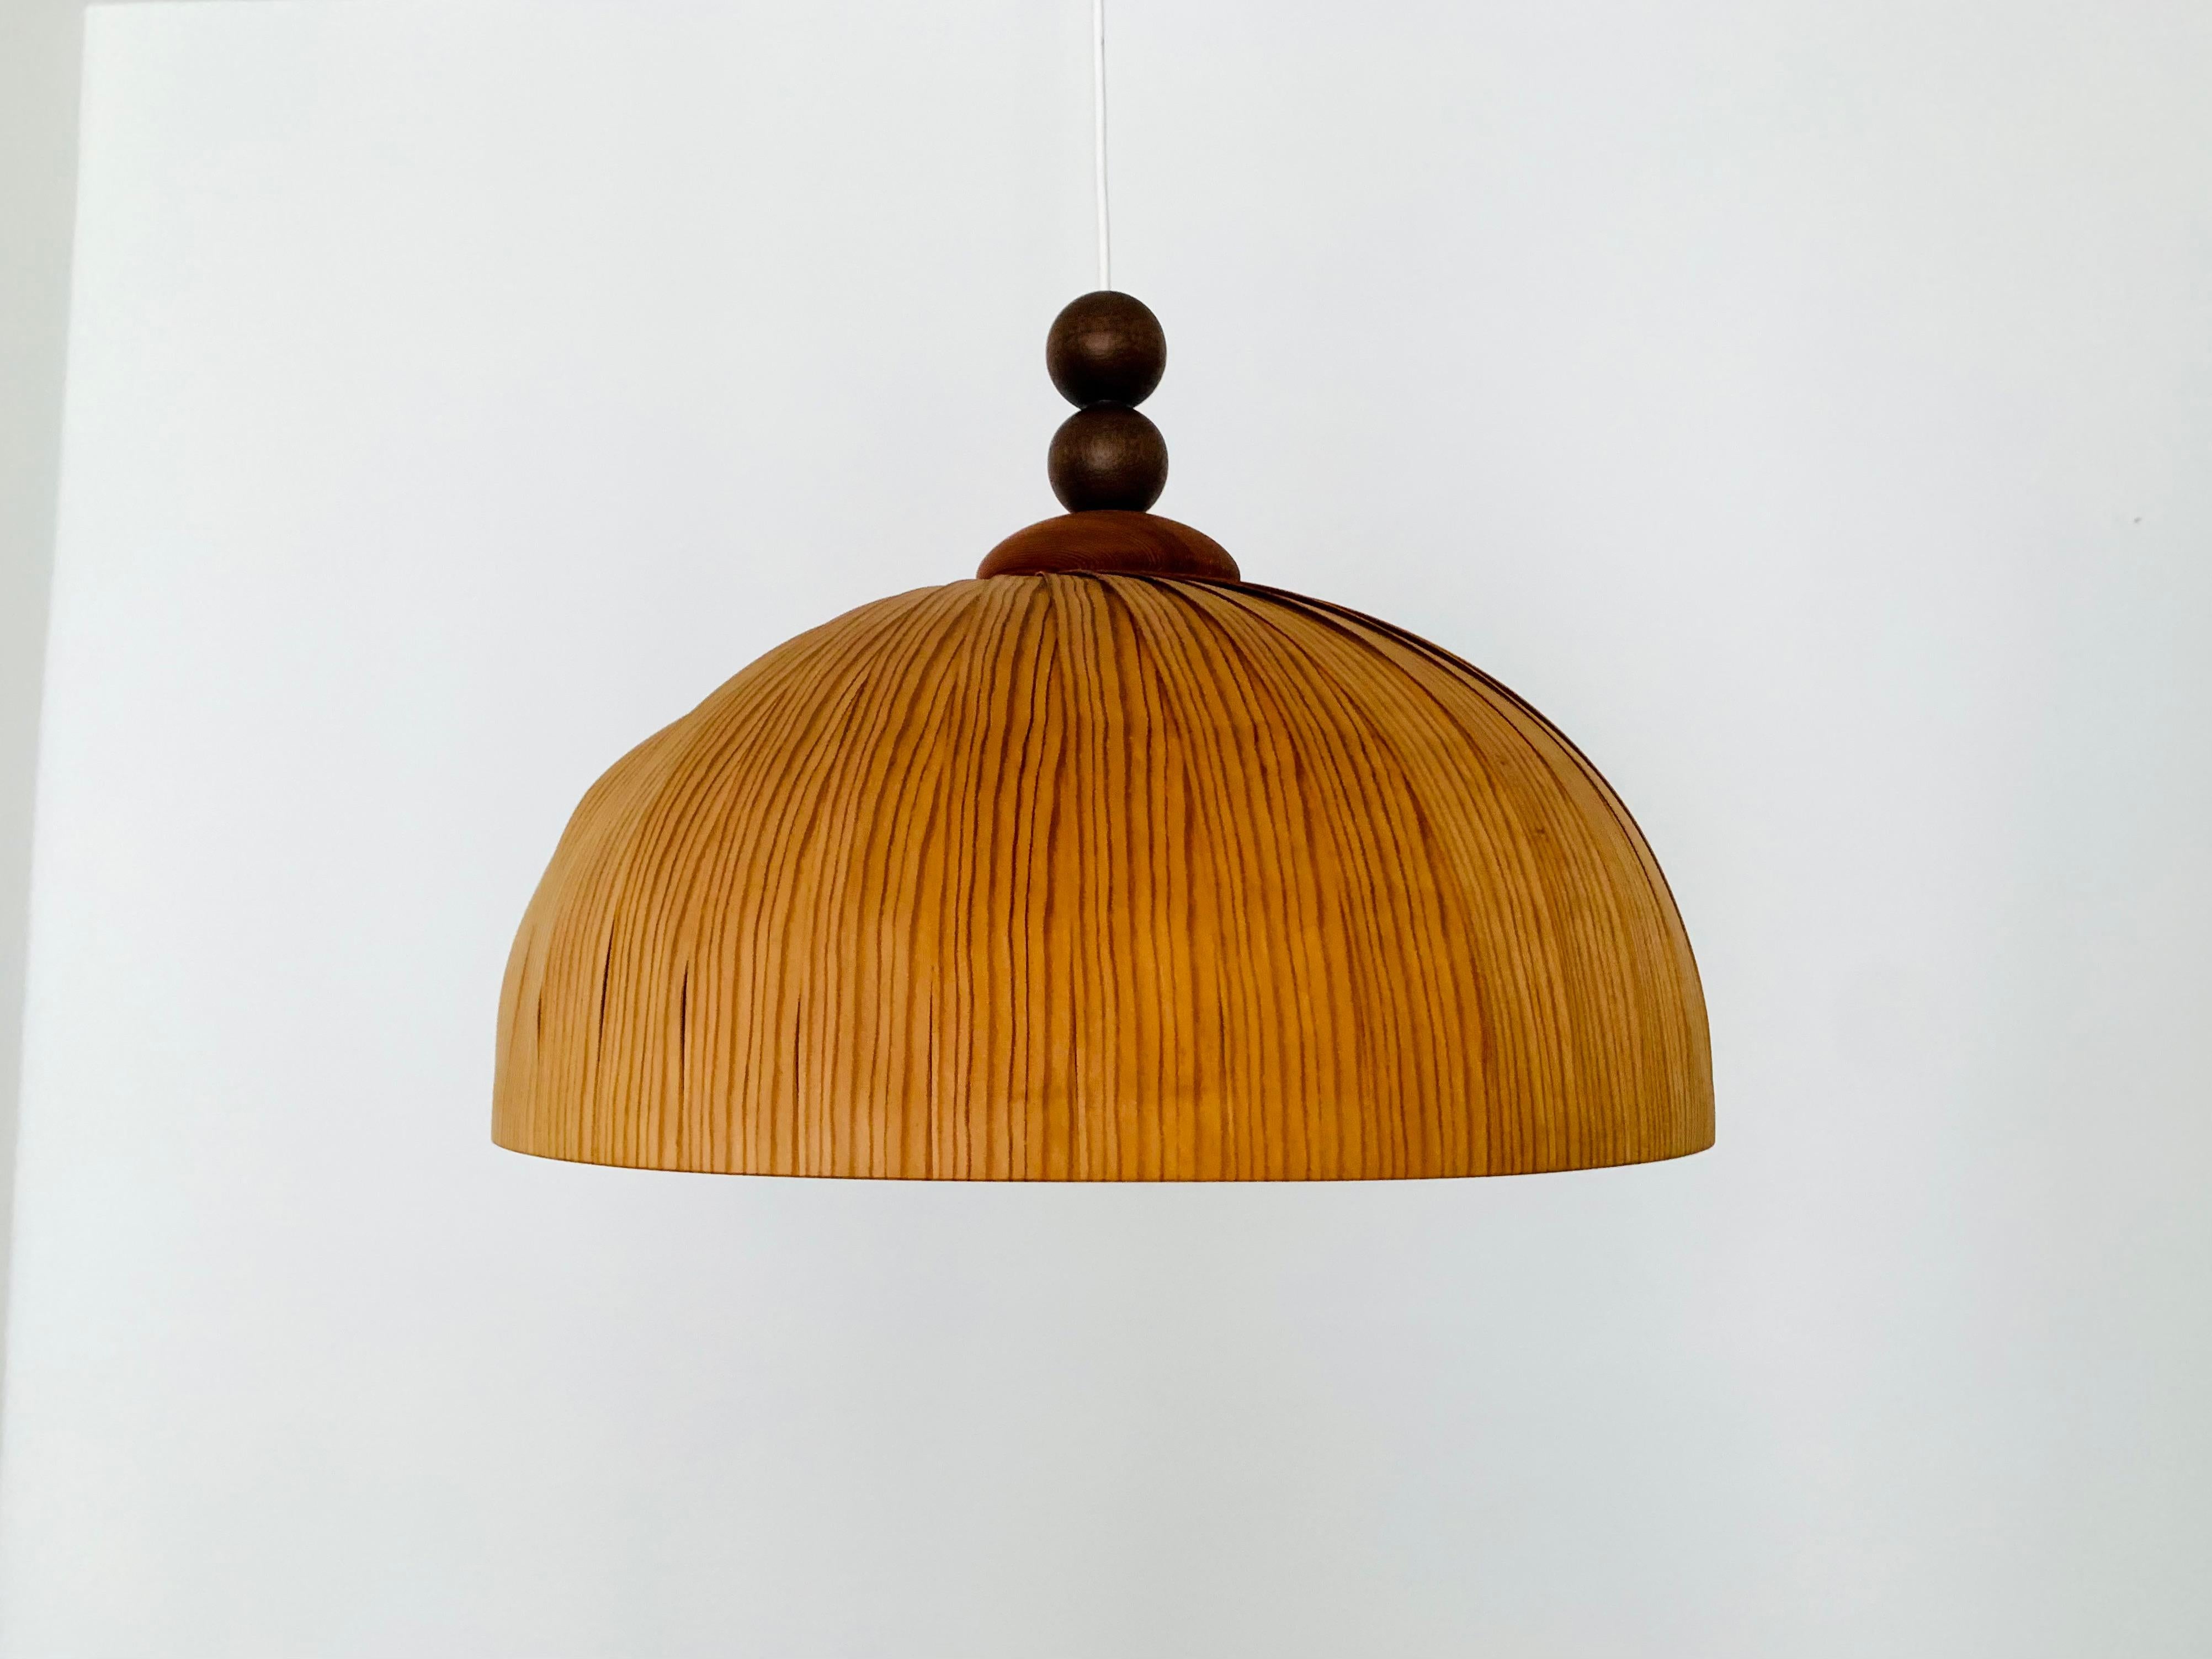 Extraordinarily beautiful wooden pendant lamp from the 1960s.
Loving and high-quality processing.
The design and the material create a very warm and pleasant light.

Condition:

Very good vintage condition with minimal signs of wear consistent